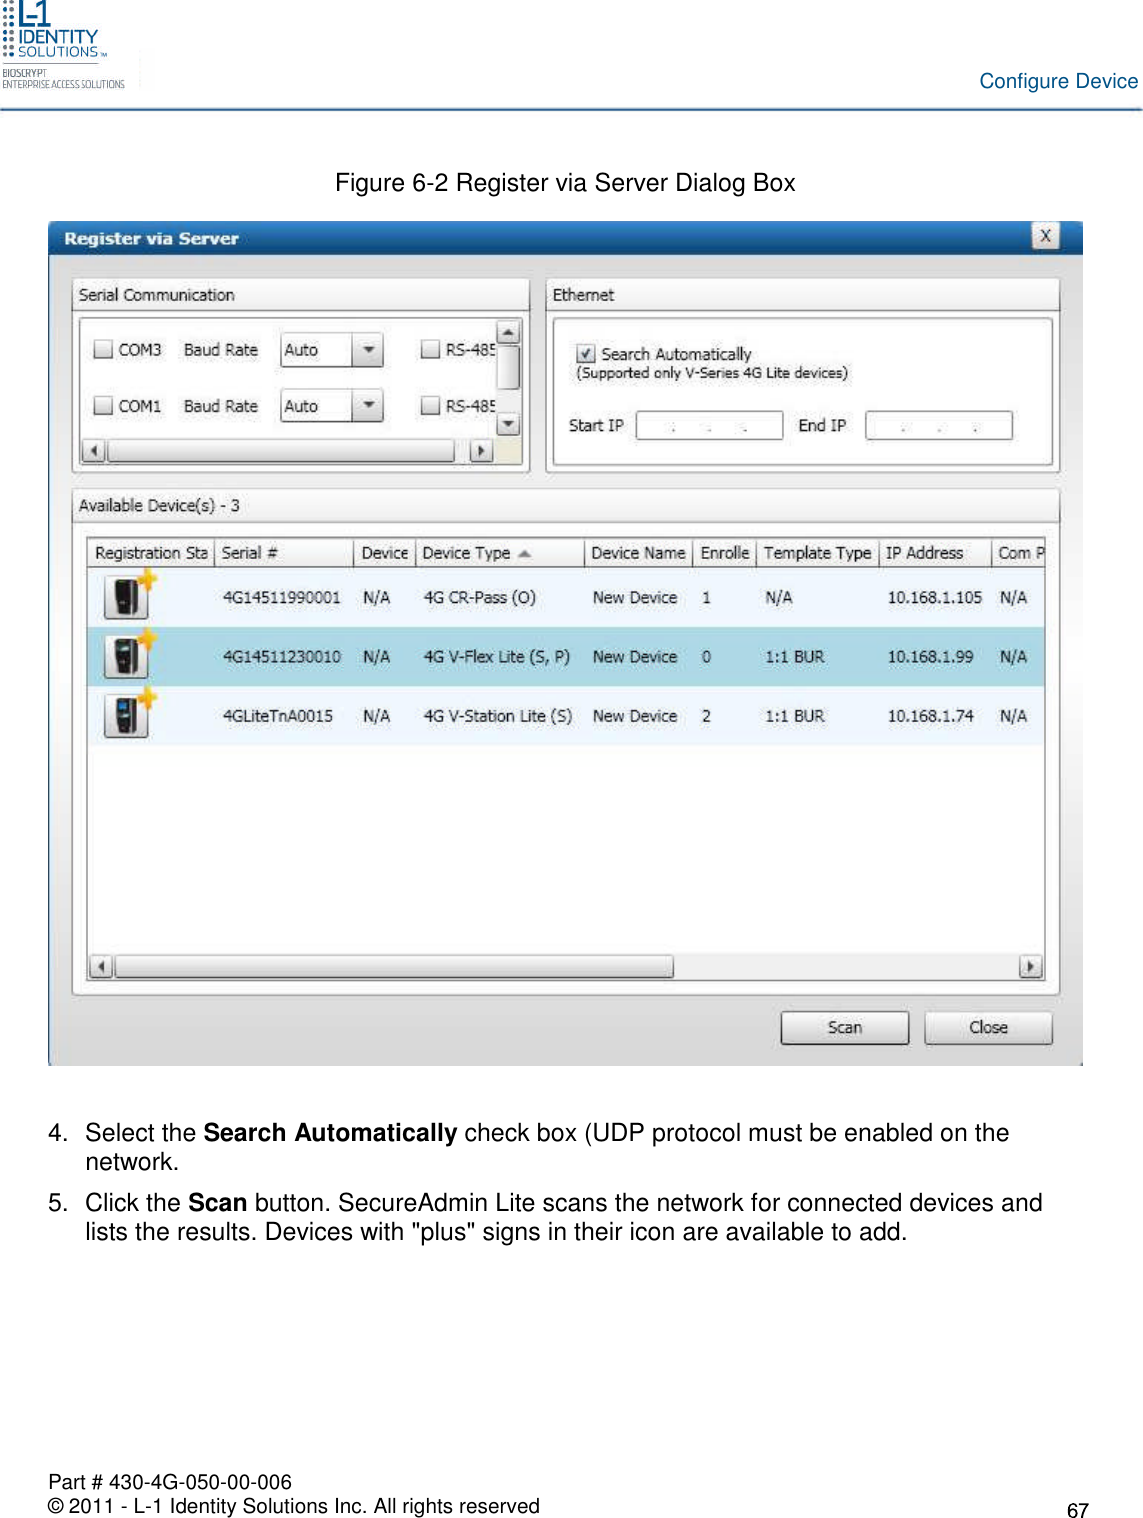 Part # 430-4G-050-00-006© 2011 - L-1 Identity Solutions Inc. All rights reservedConfigure DeviceFigure 6-2 Register via Server Dialog Box4. Select the Search Automatically check box (UDP protocol must be enabled on thenetwork.5. Click the Scan button. SecureAdmin Lite scans the network for connected devices andlists the results. Devices with &quot;plus&quot; signs in their icon are available to add.